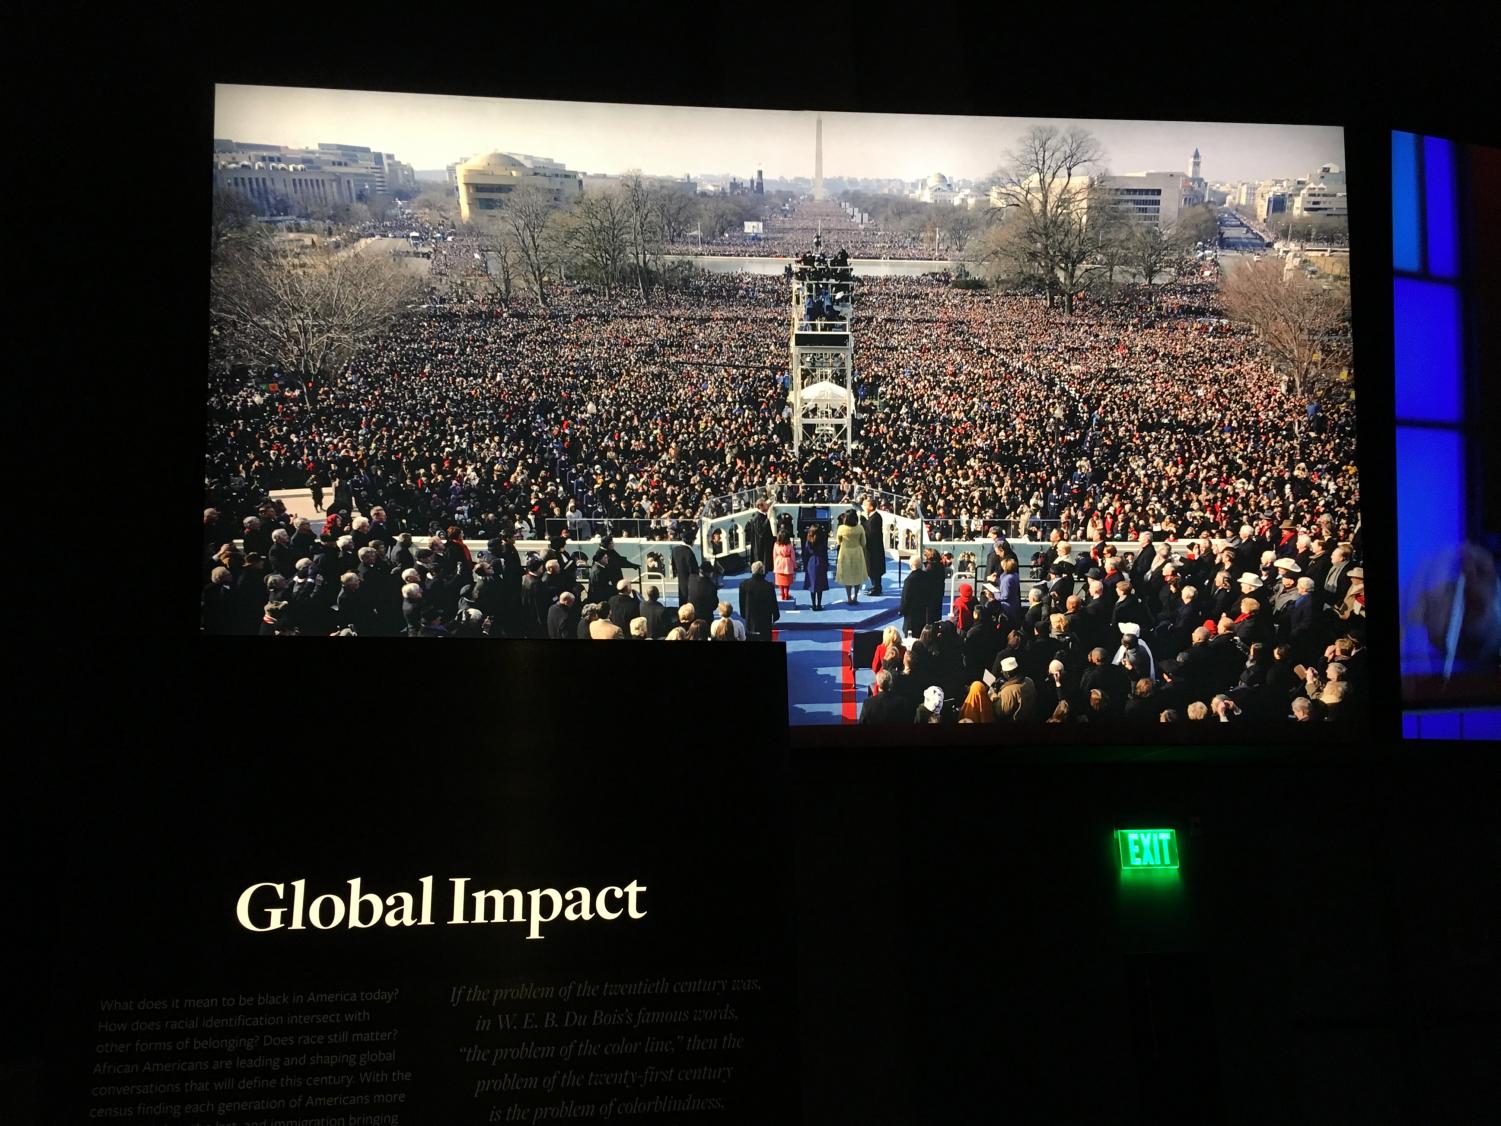 The exhibit on Former President Barack Obama included a wall that had a few paragraphs summarizing his tenure, a few pictures, and a two minute video.